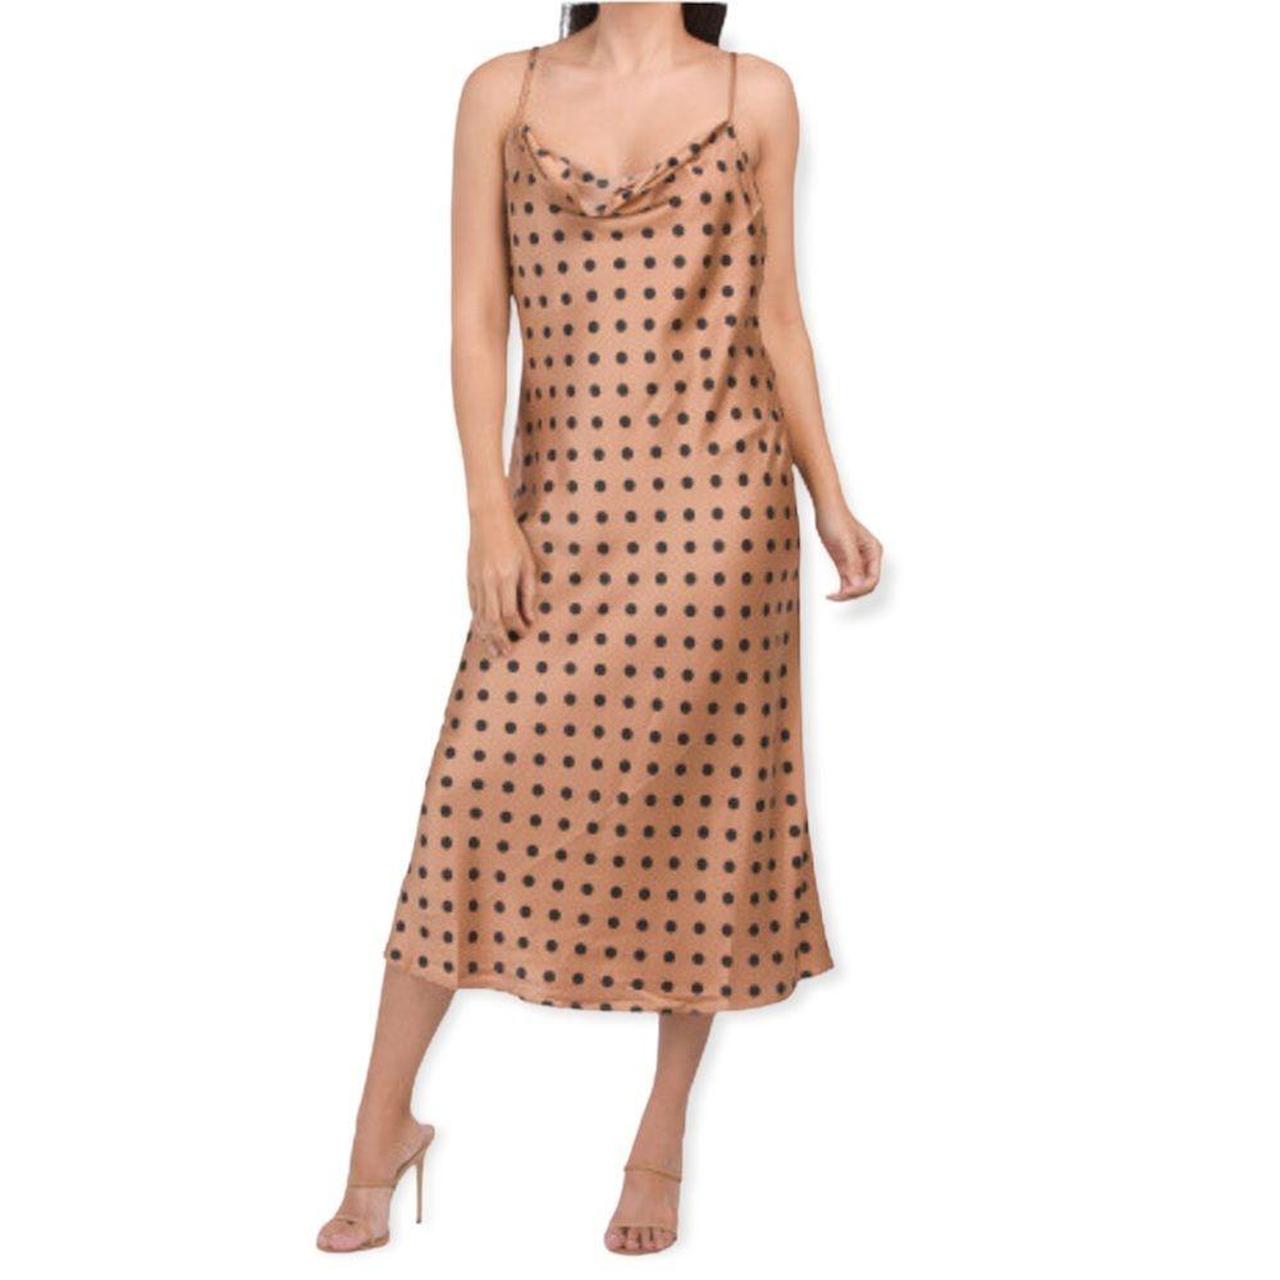 Product Image 1 - Creamy tan with polkadots 
Silky